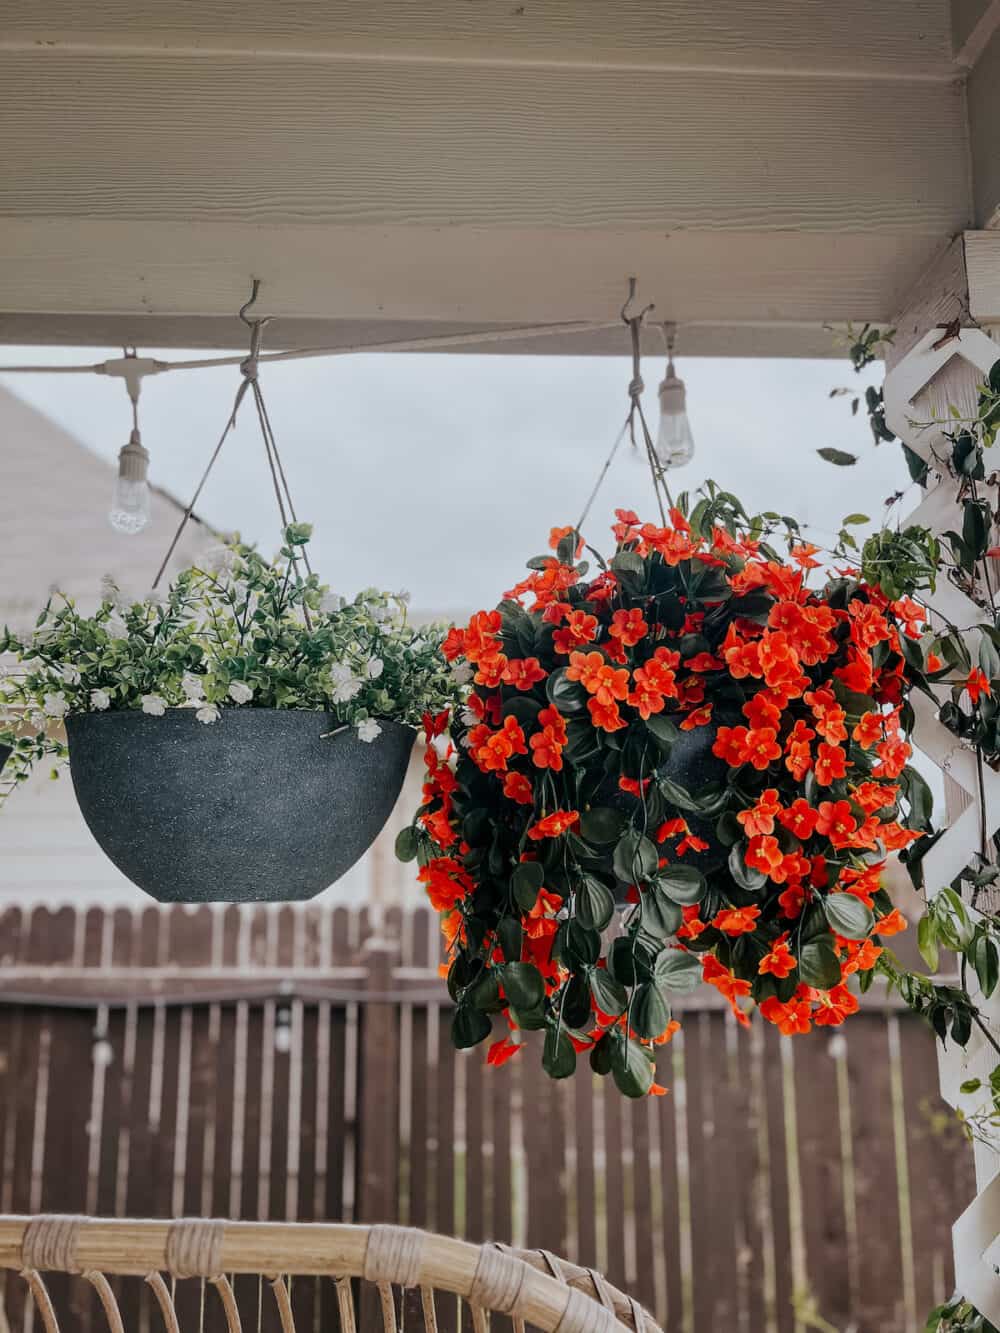 faux hanging plants in an outdoor planter